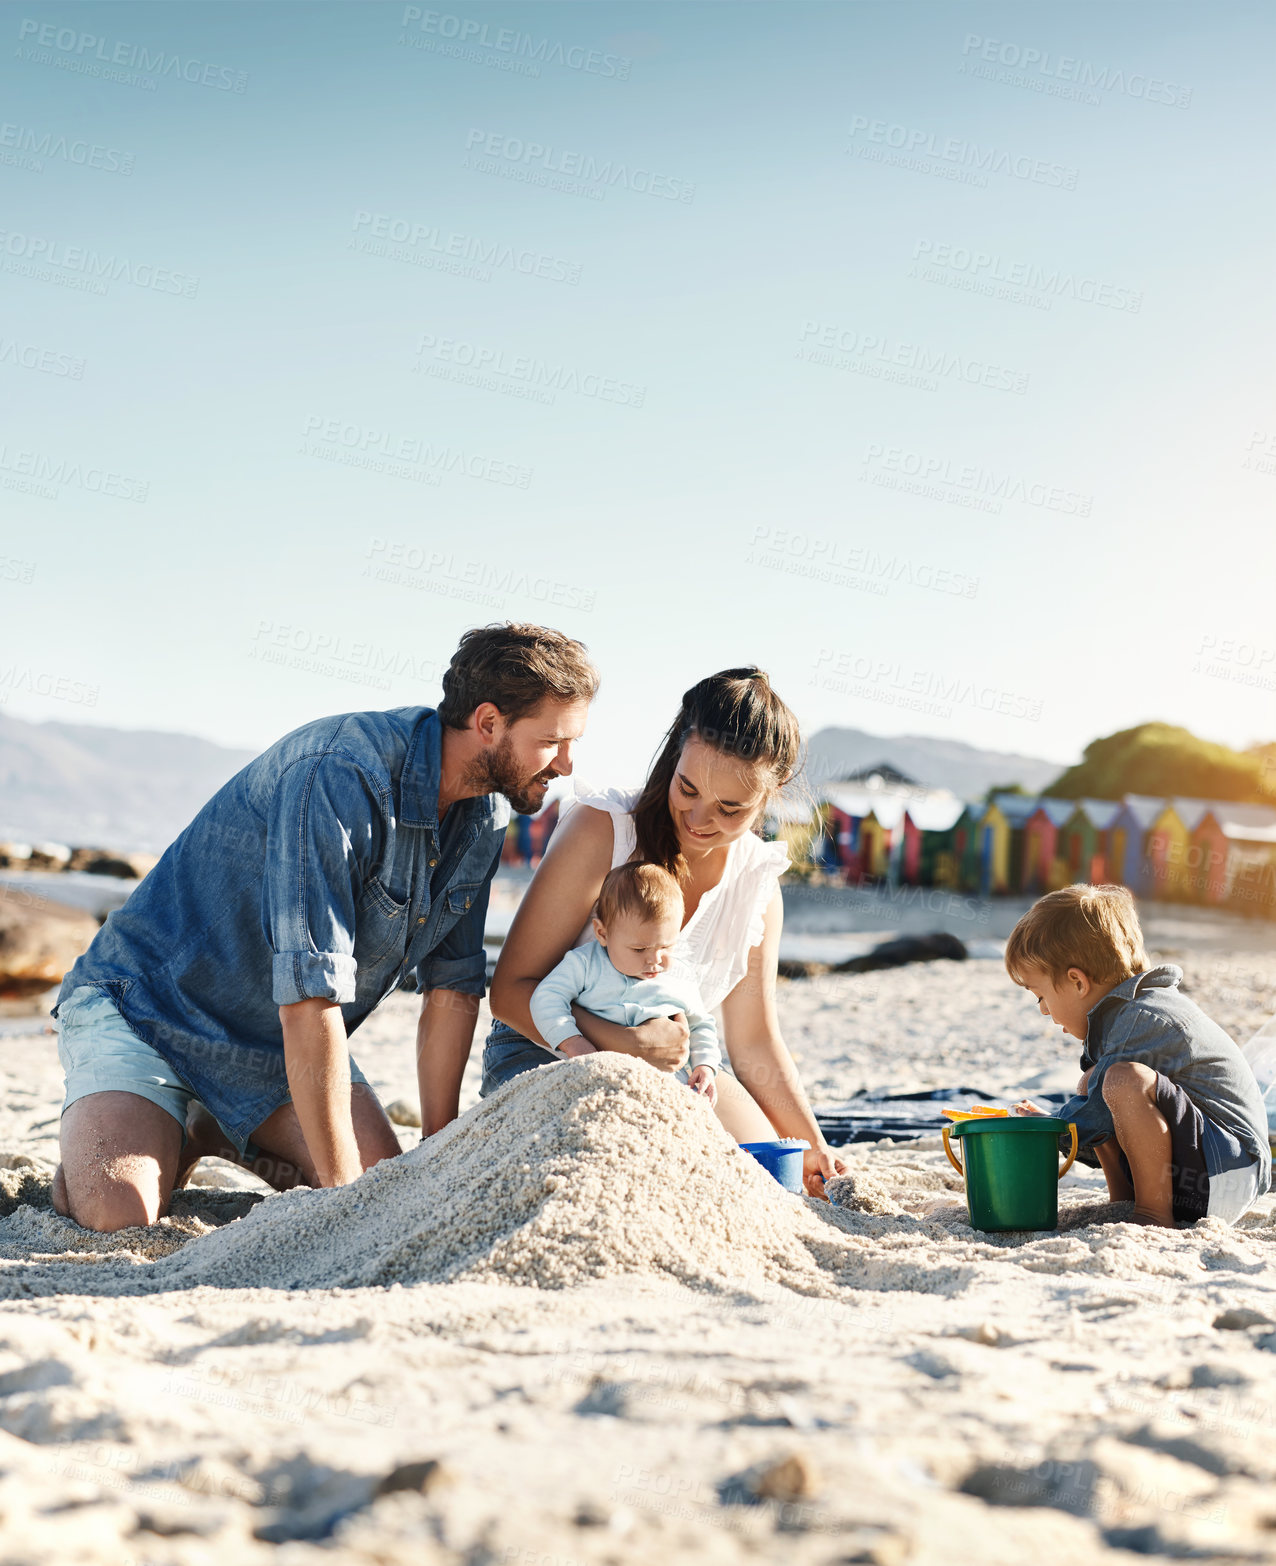 Buy stock photo Sandcastle, holiday and children at the beach with family, love and support. Baby, mom and dad together with kids playing in the sun with happiness and smile by the ocean and mockup with bonding